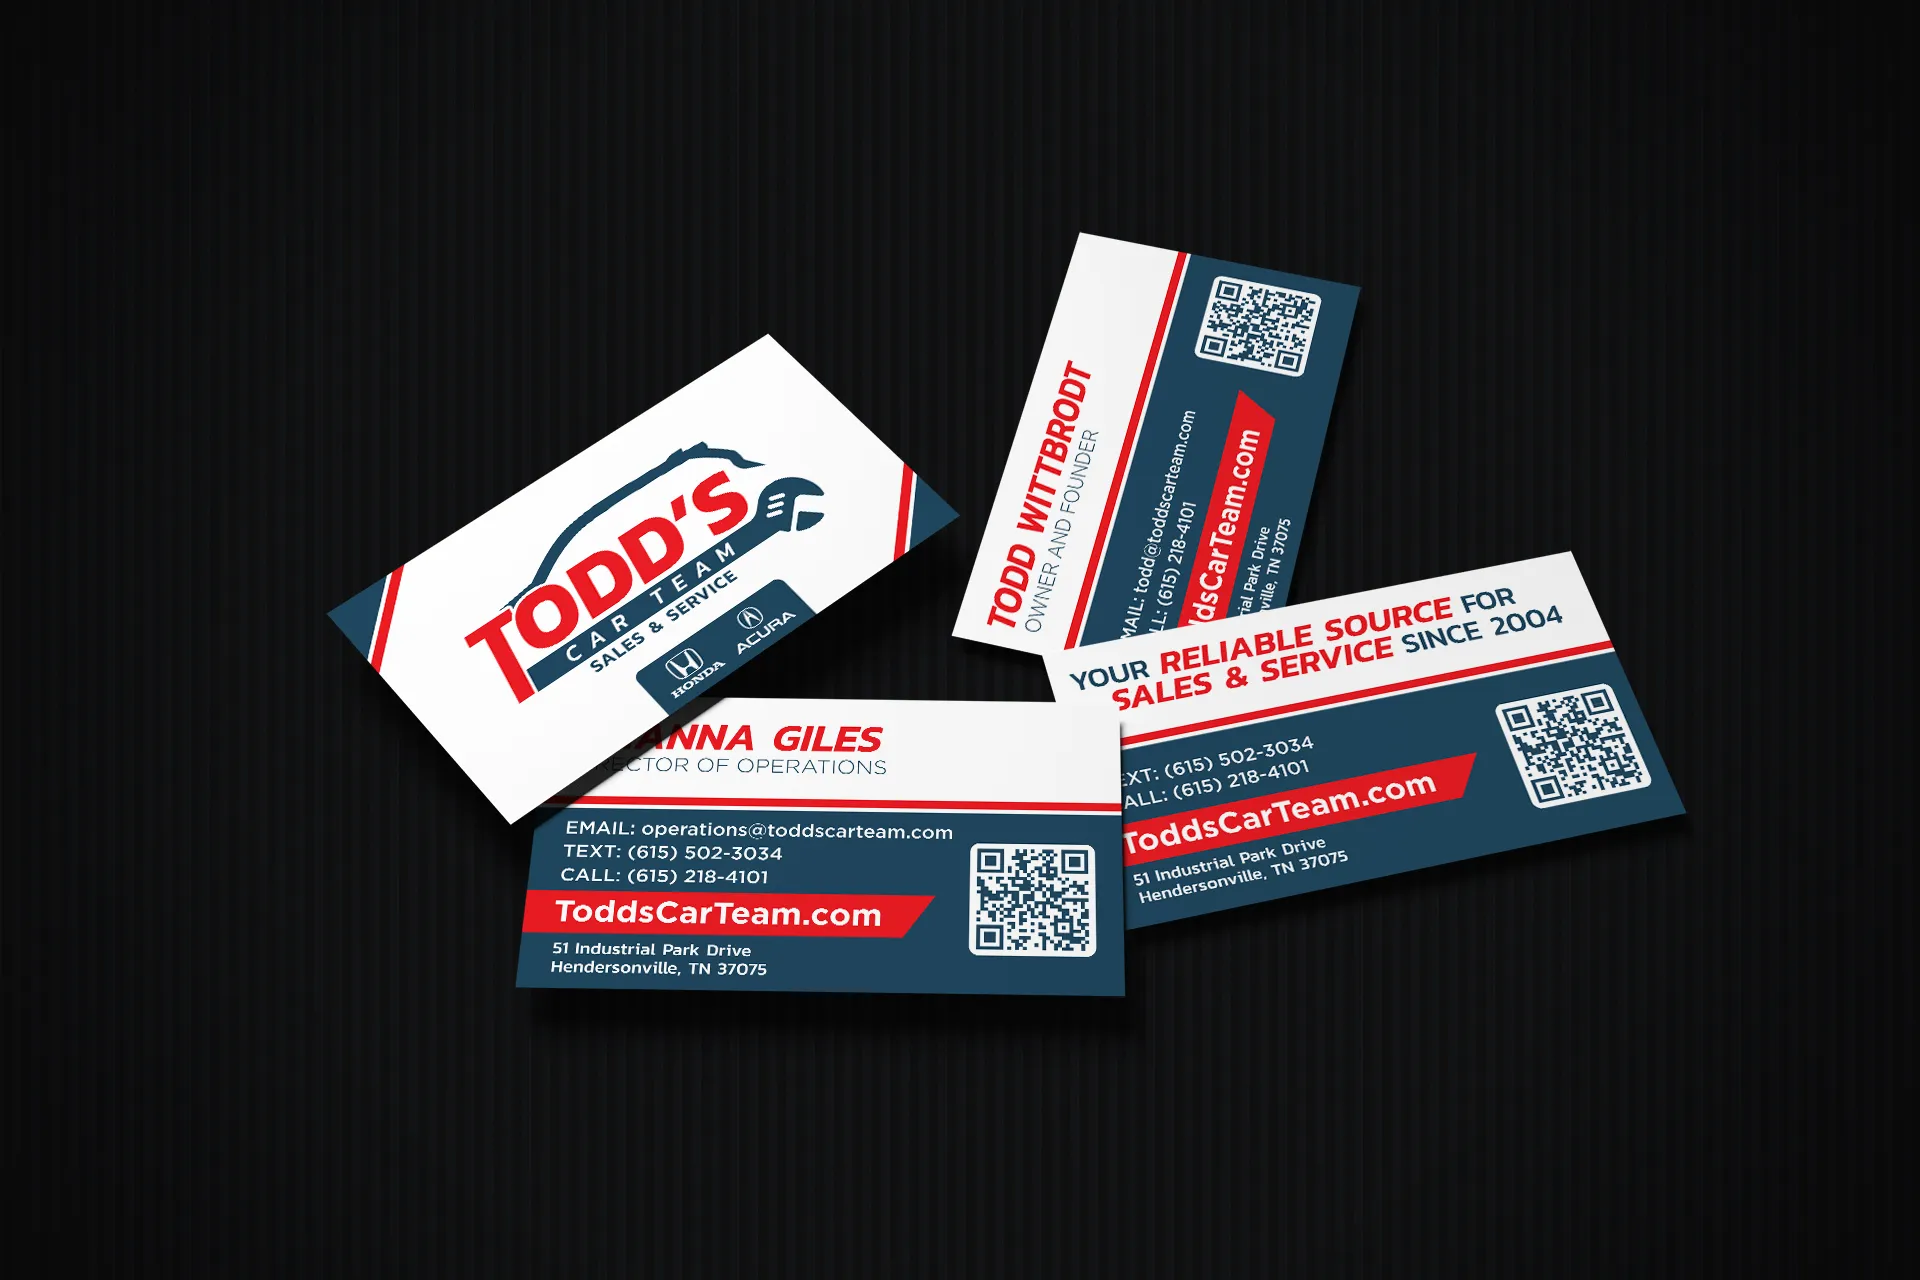 Todd's Car Team Business Cards